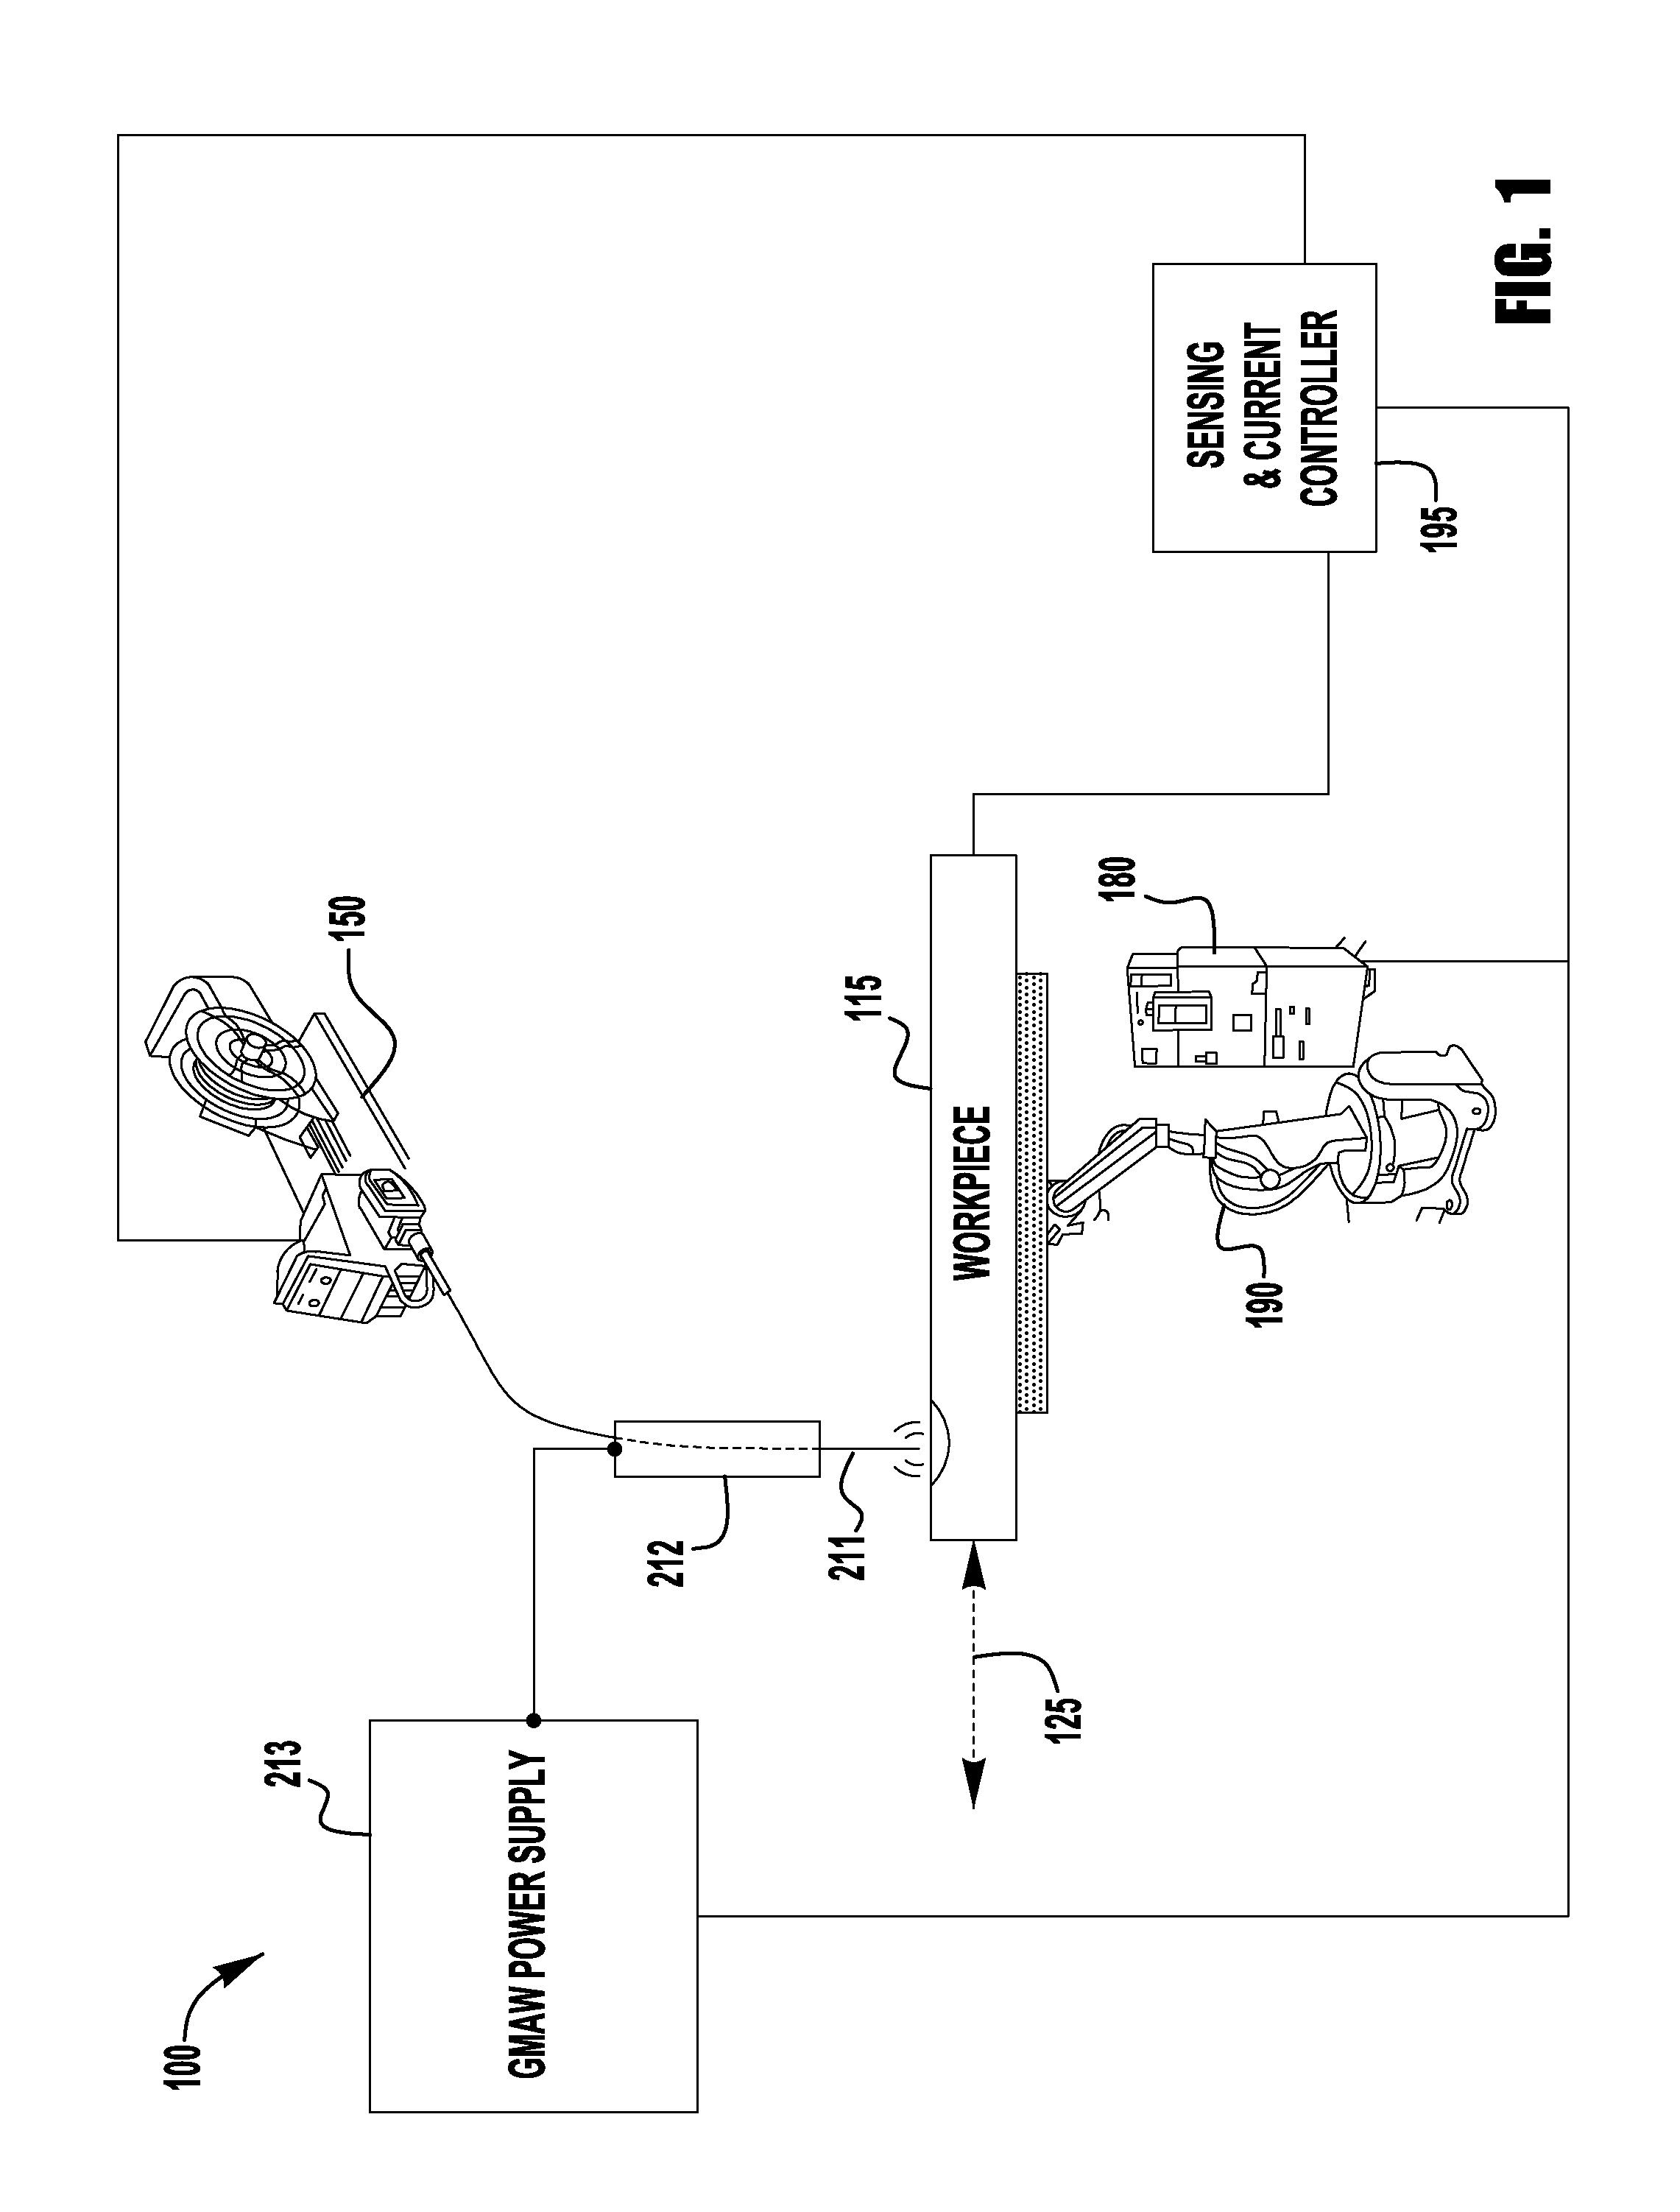 System and method of controlling attachment and release of additive manufacturing builds using a welding process